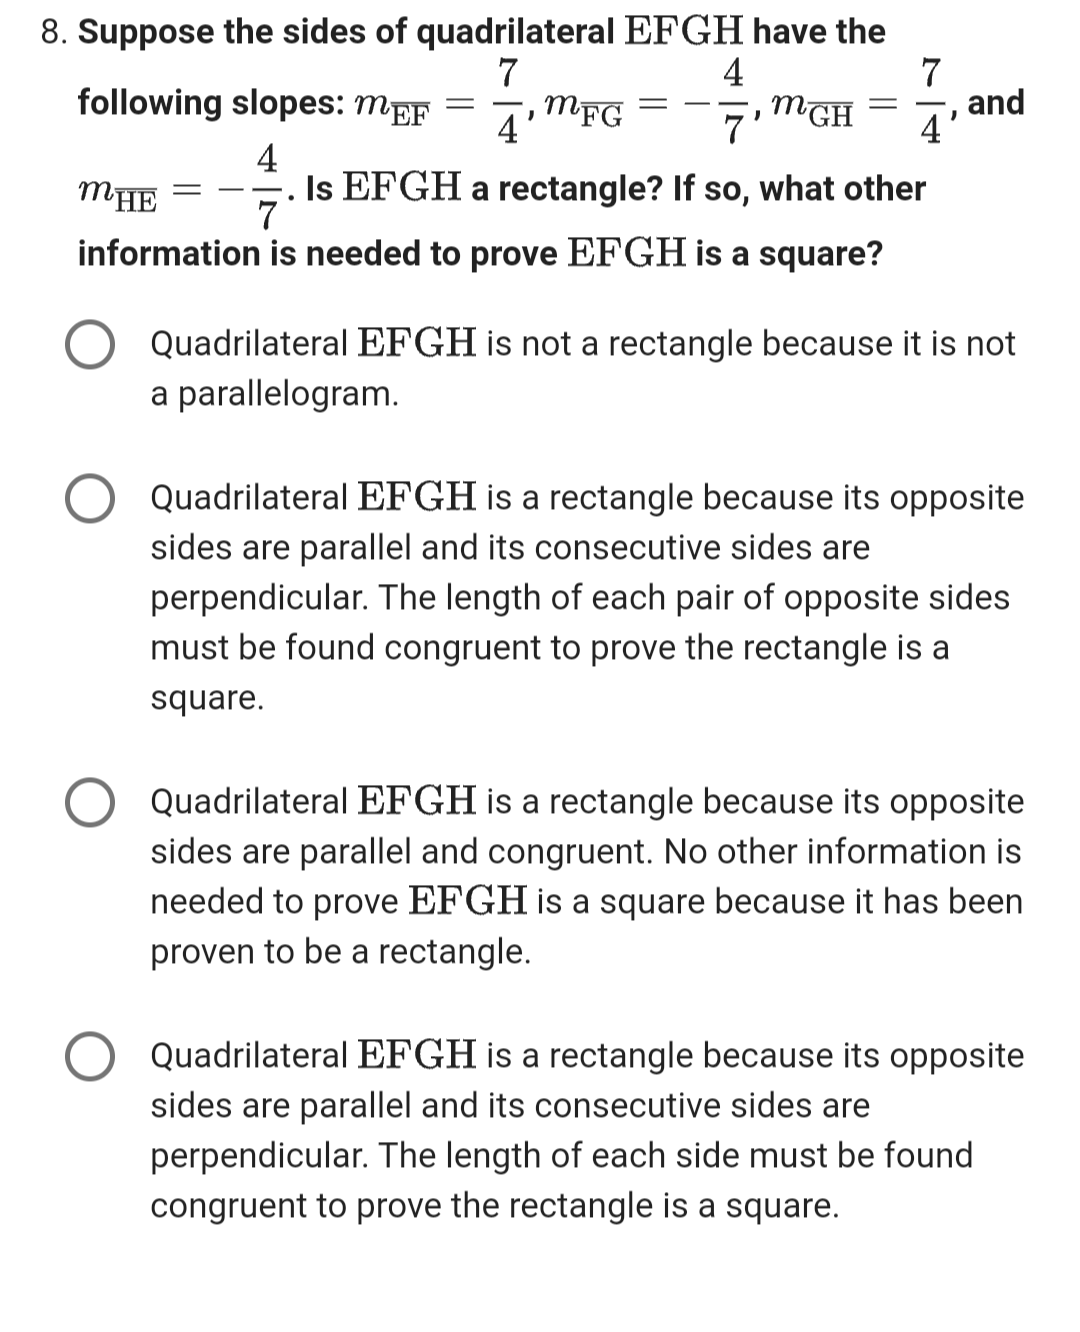 8. Suppose the sides of quadrilateral EFGH have the
7
following slopes: MEF =
MFG
4
4
4
MGH
7'
=
7
4
and
MHE
•
7
Is EFGH a rectangle? If so, what other
information is needed to prove EFGH is a square?
Quadrilateral EFGH is not a rectangle because it is not
a parallelogram.
Quadrilateral EFGH is a rectangle because its opposite
sides are parallel and its consecutive sides are
perpendicular. The length of each pair of opposite sides
must be found congruent to prove the rectangle is a
square.
Quadrilateral EFGH is a rectangle because its opposite
sides are parallel and congruent. No other information is
needed to prove EFGH is a square because it has been
proven to be a rectangle.
Quadrilateral EFGH is a rectangle because its opposite
sides are parallel and its consecutive sides are
perpendicular. The length of each side must be found
congruent to prove the rectangle is a square.